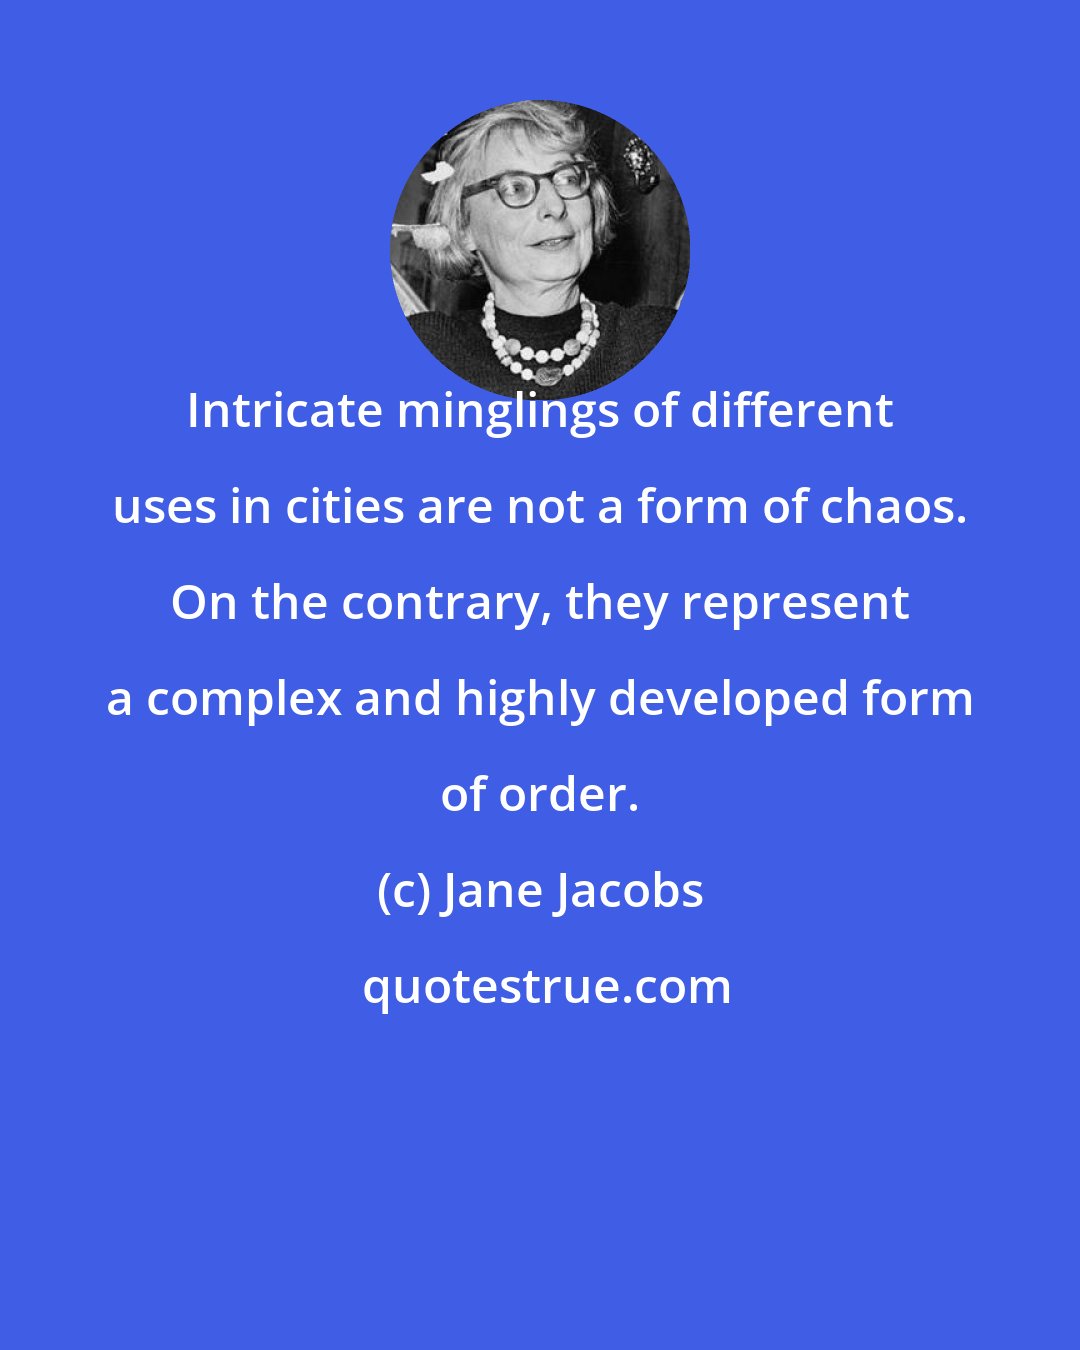 Jane Jacobs: Intricate minglings of different uses in cities are not a form of chaos. On the contrary, they represent a complex and highly developed form of order.